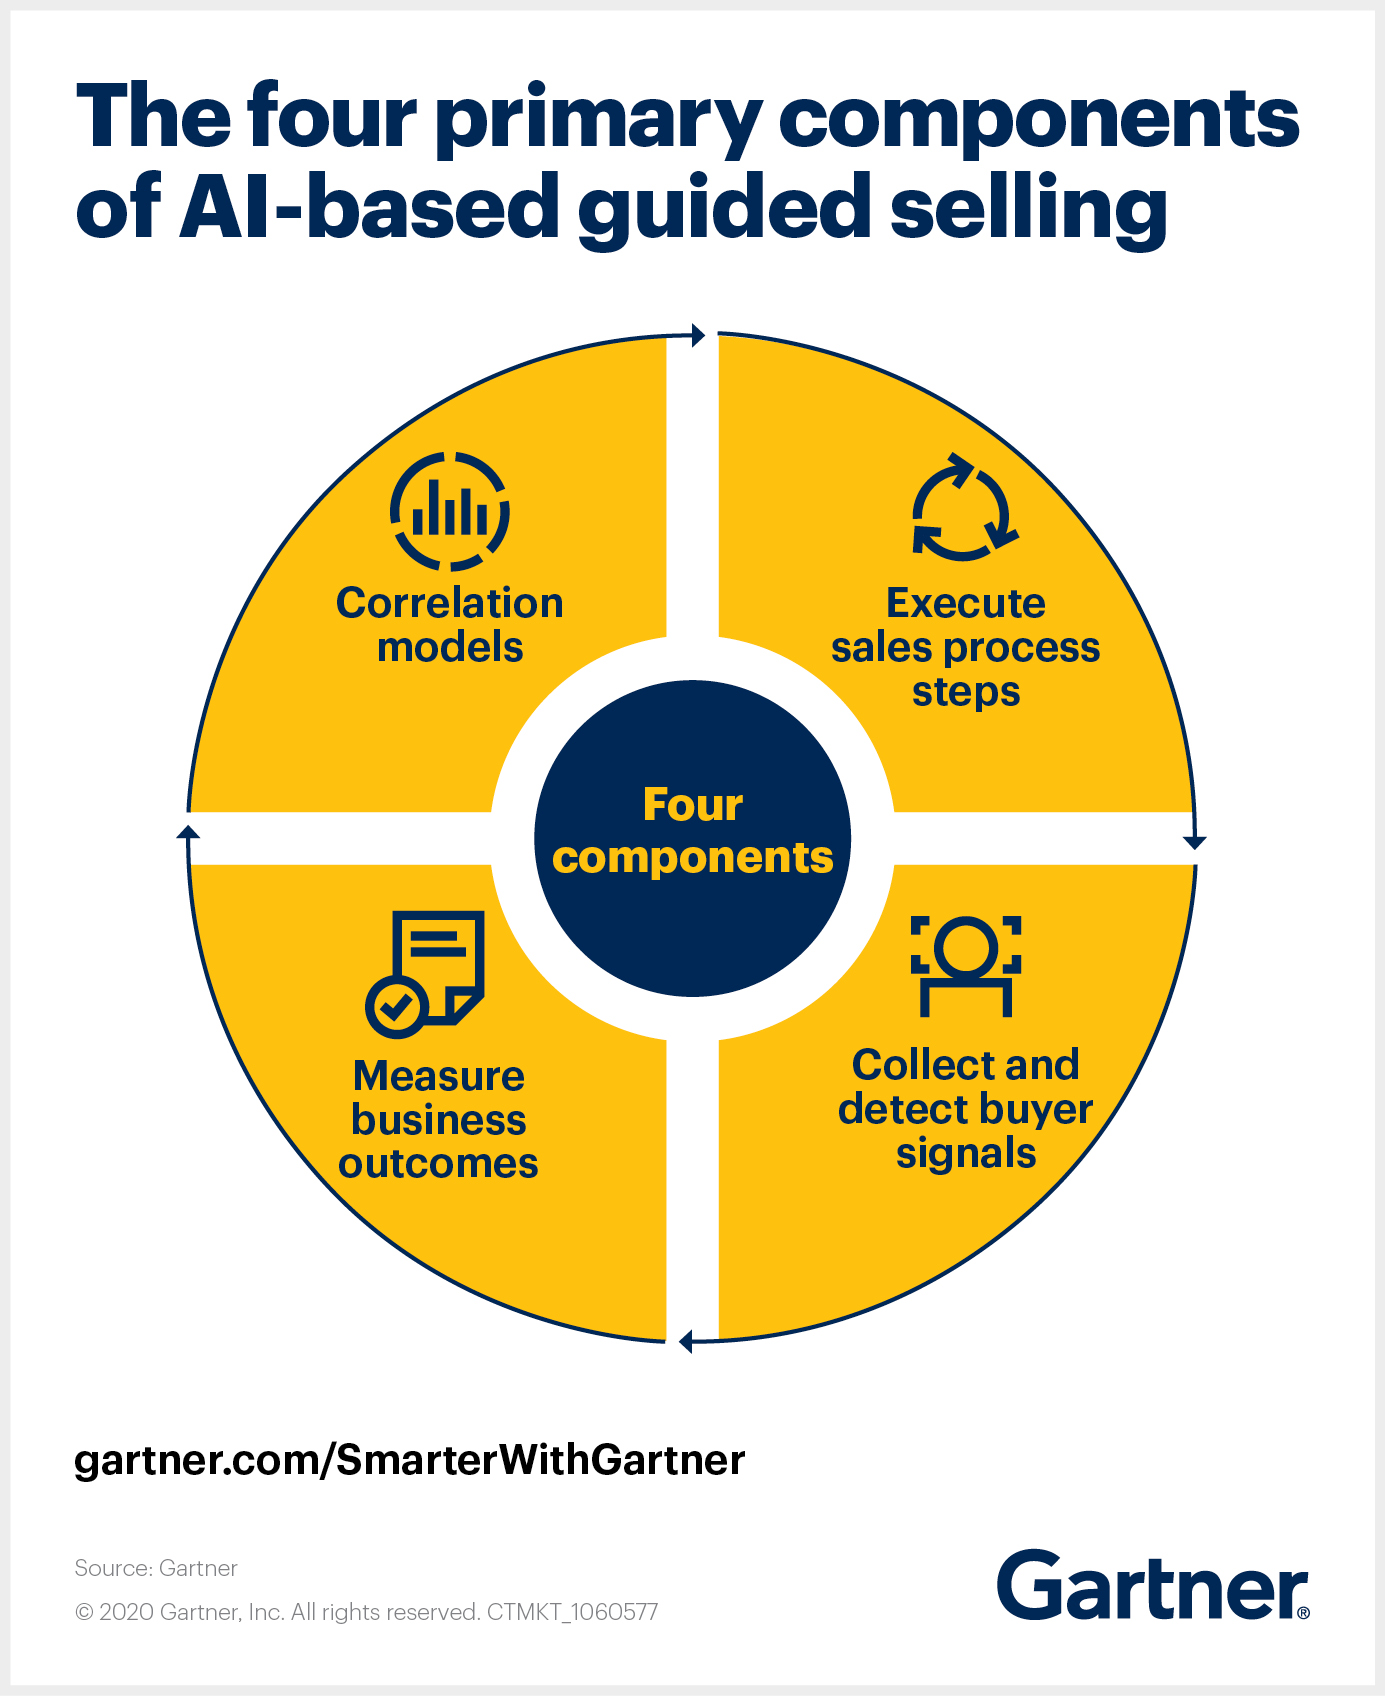 Gartner outlines the four primary components of AI-based guided selling.